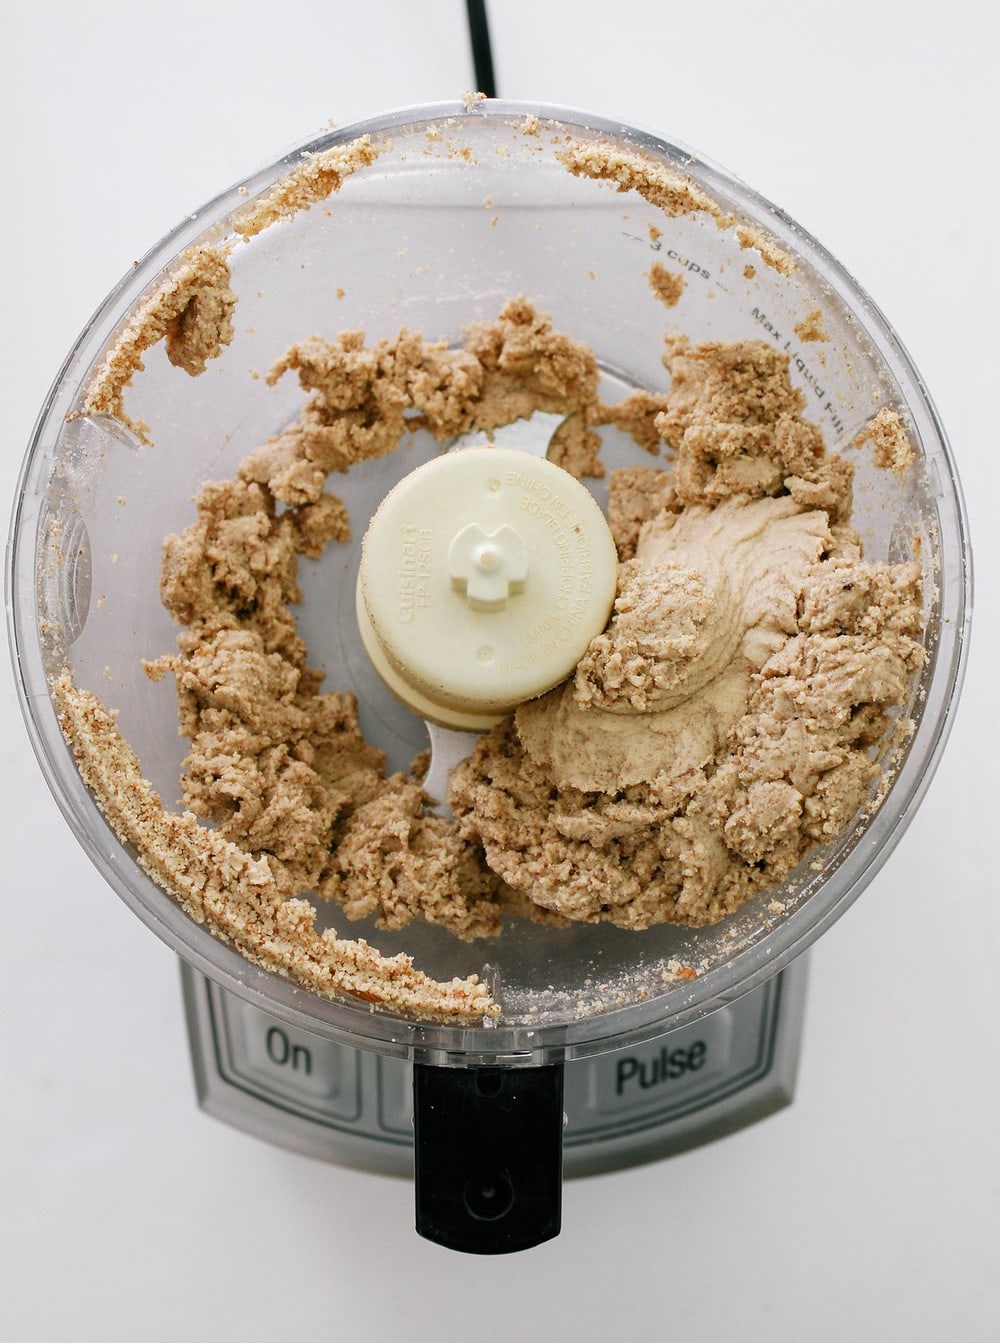 top down view of homemade almond butter in a food processor after being processed for about 10 minutes, clumpy in formation